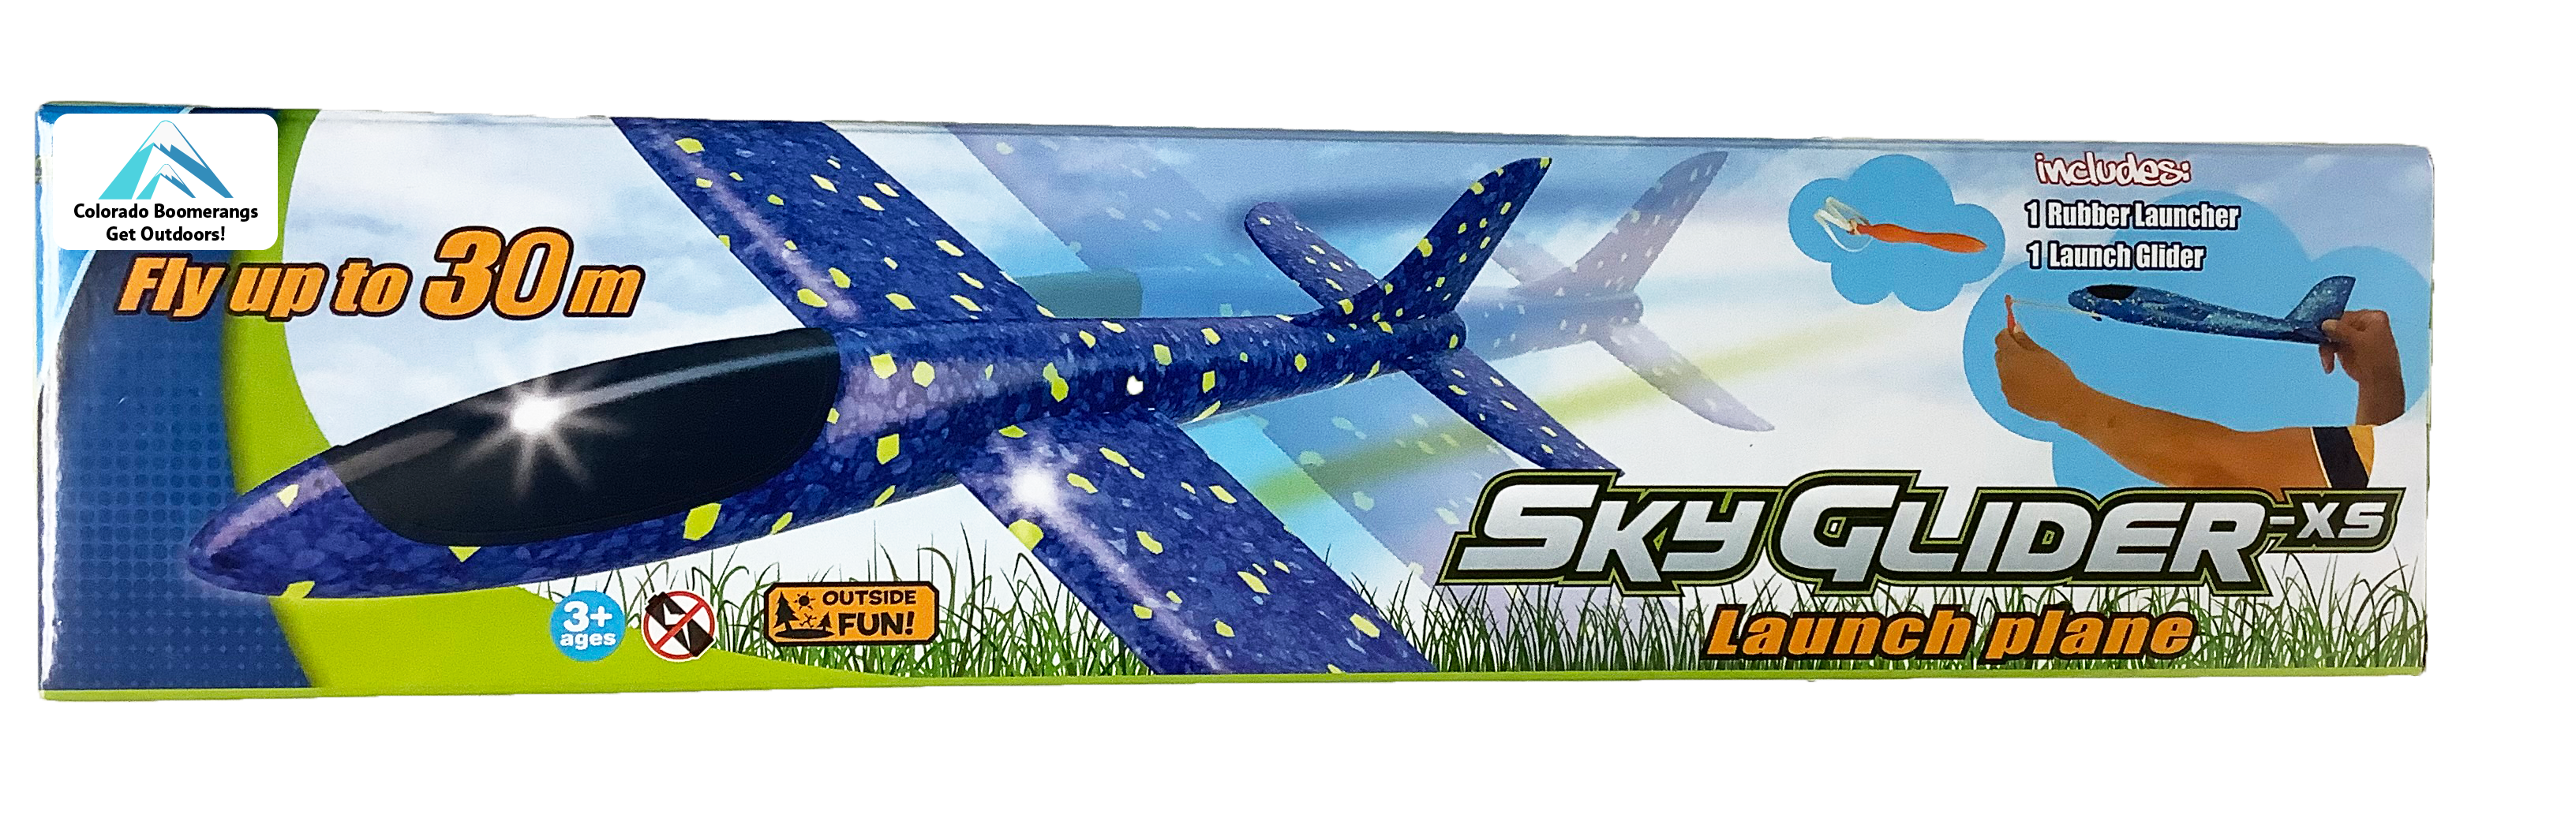 Skyglider-XS Foam Airplane with launcher